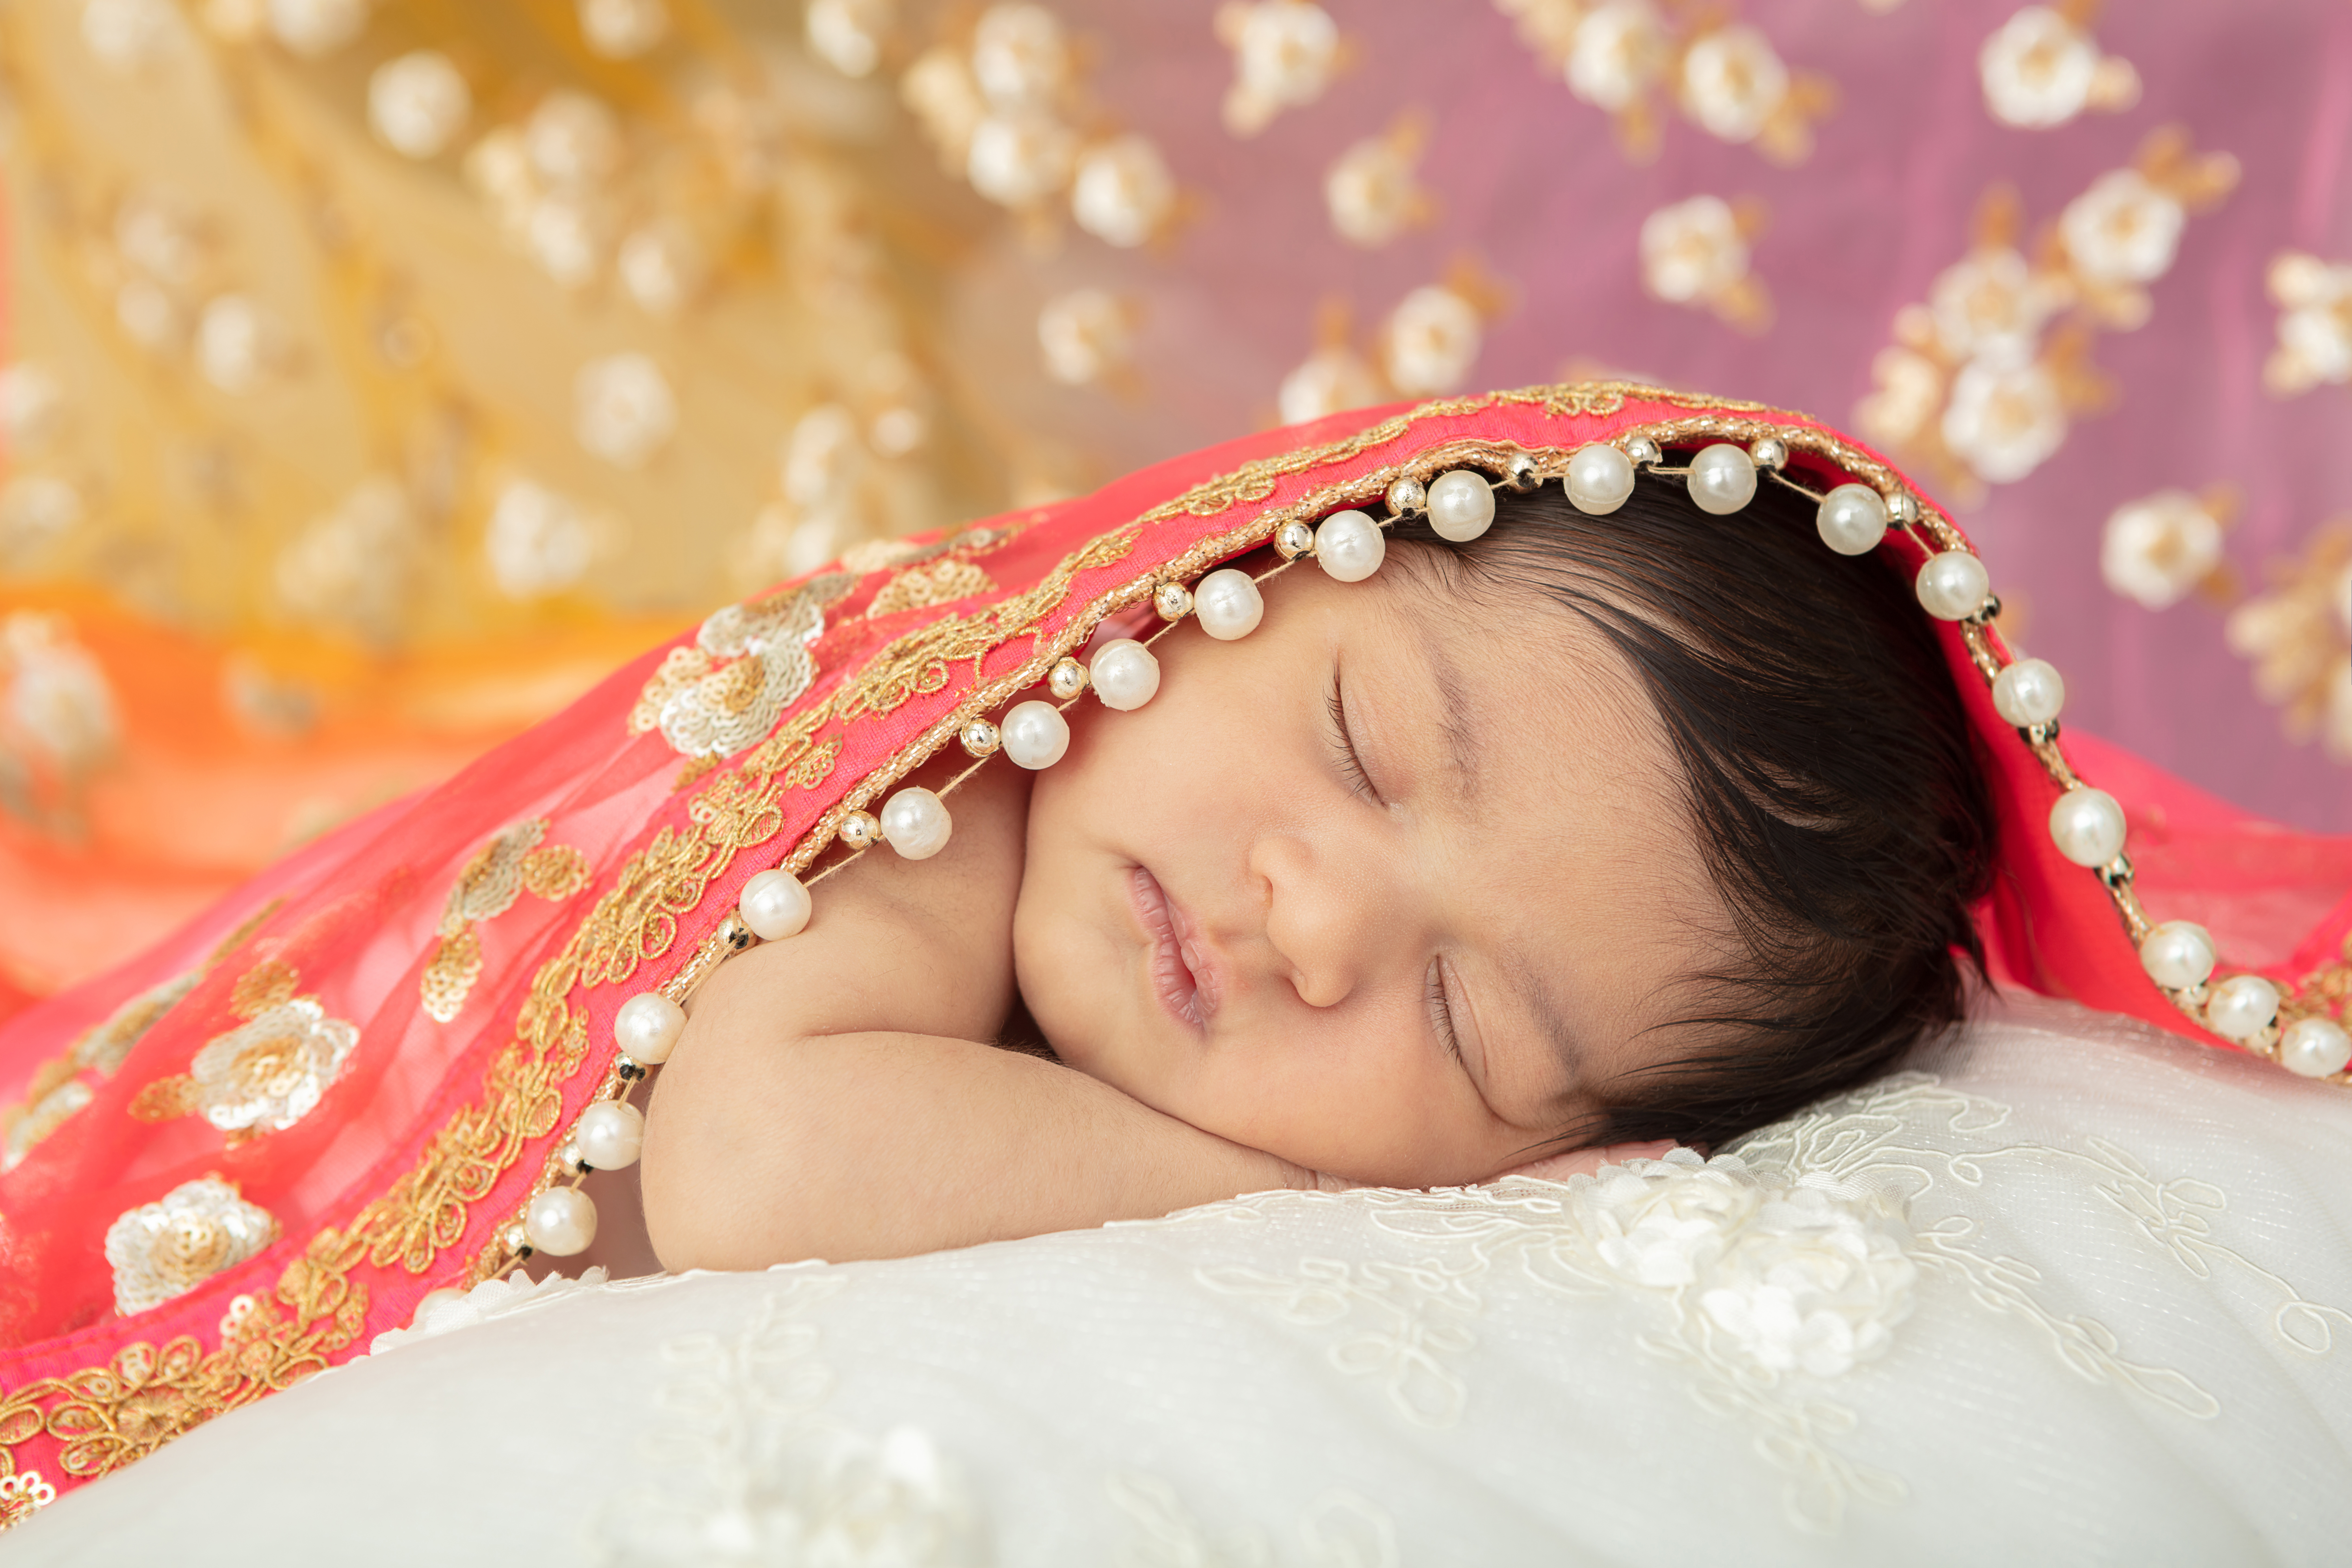 newborn Indian baby girl resting on a textured cream colored blanket, draped in her mother's sari